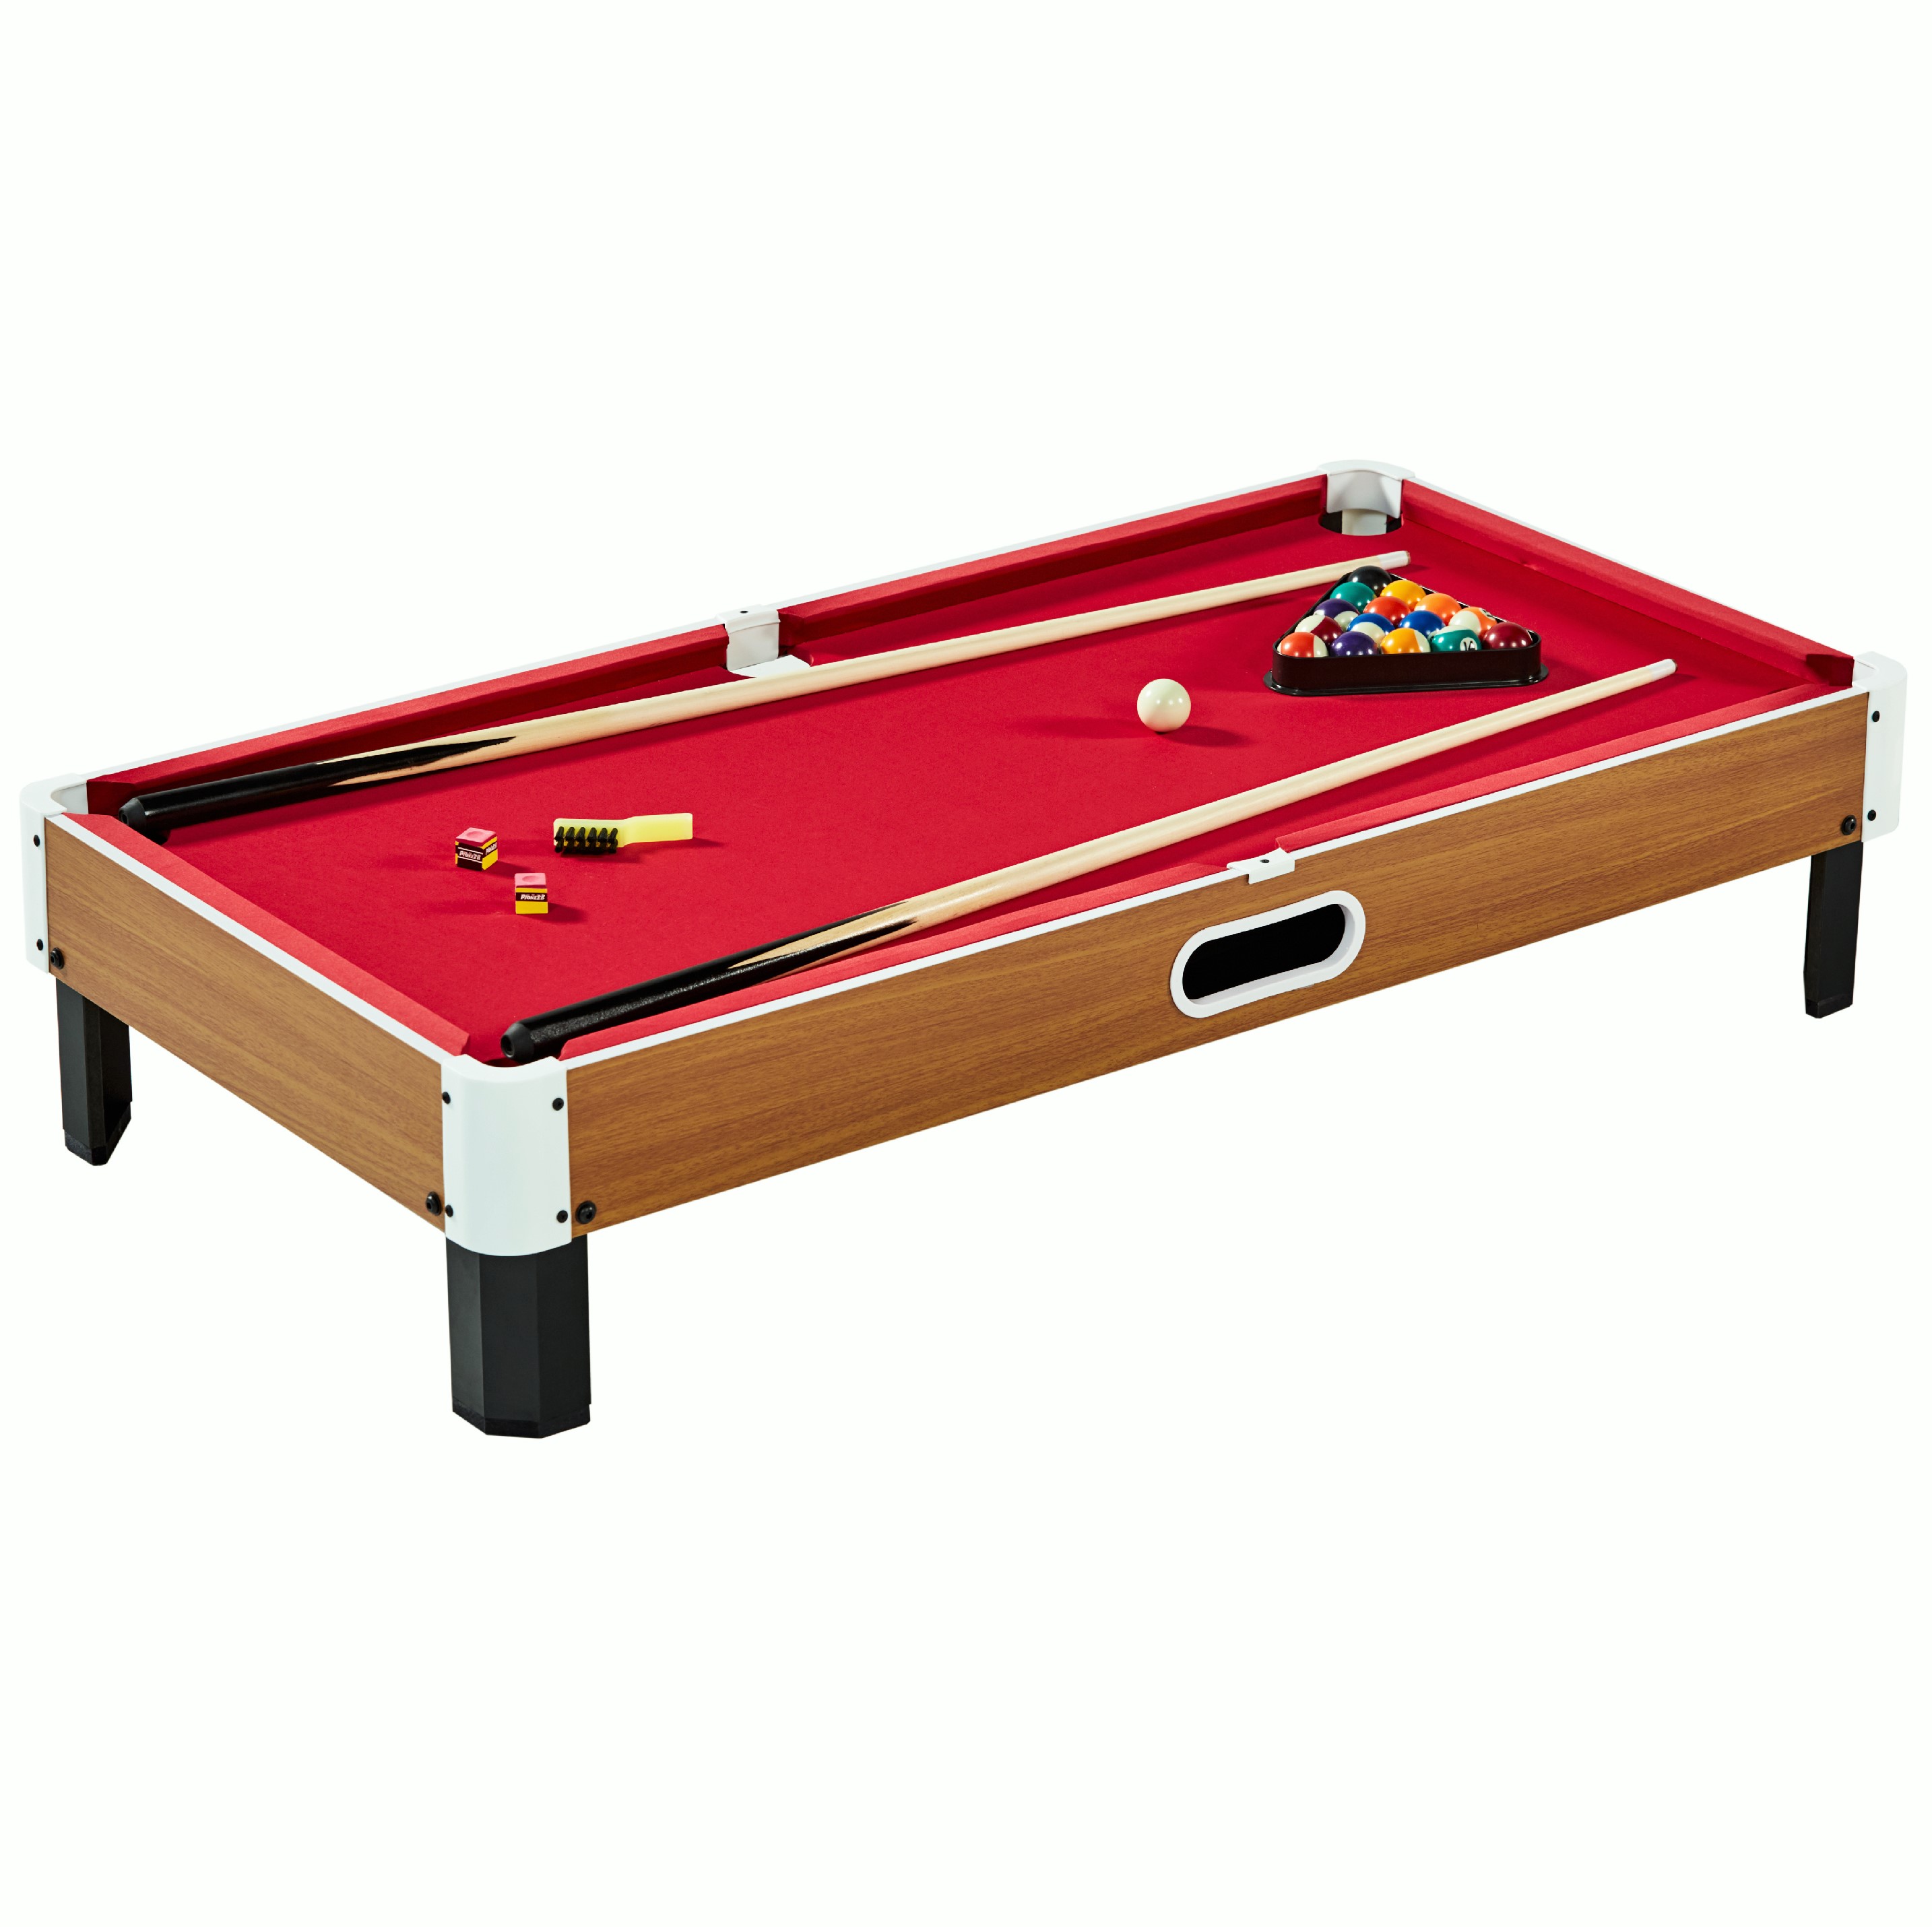 MD Sports Largest 48" Tabletop Billiard Pool Table, Compact Size, Burgundy - image 1 of 11